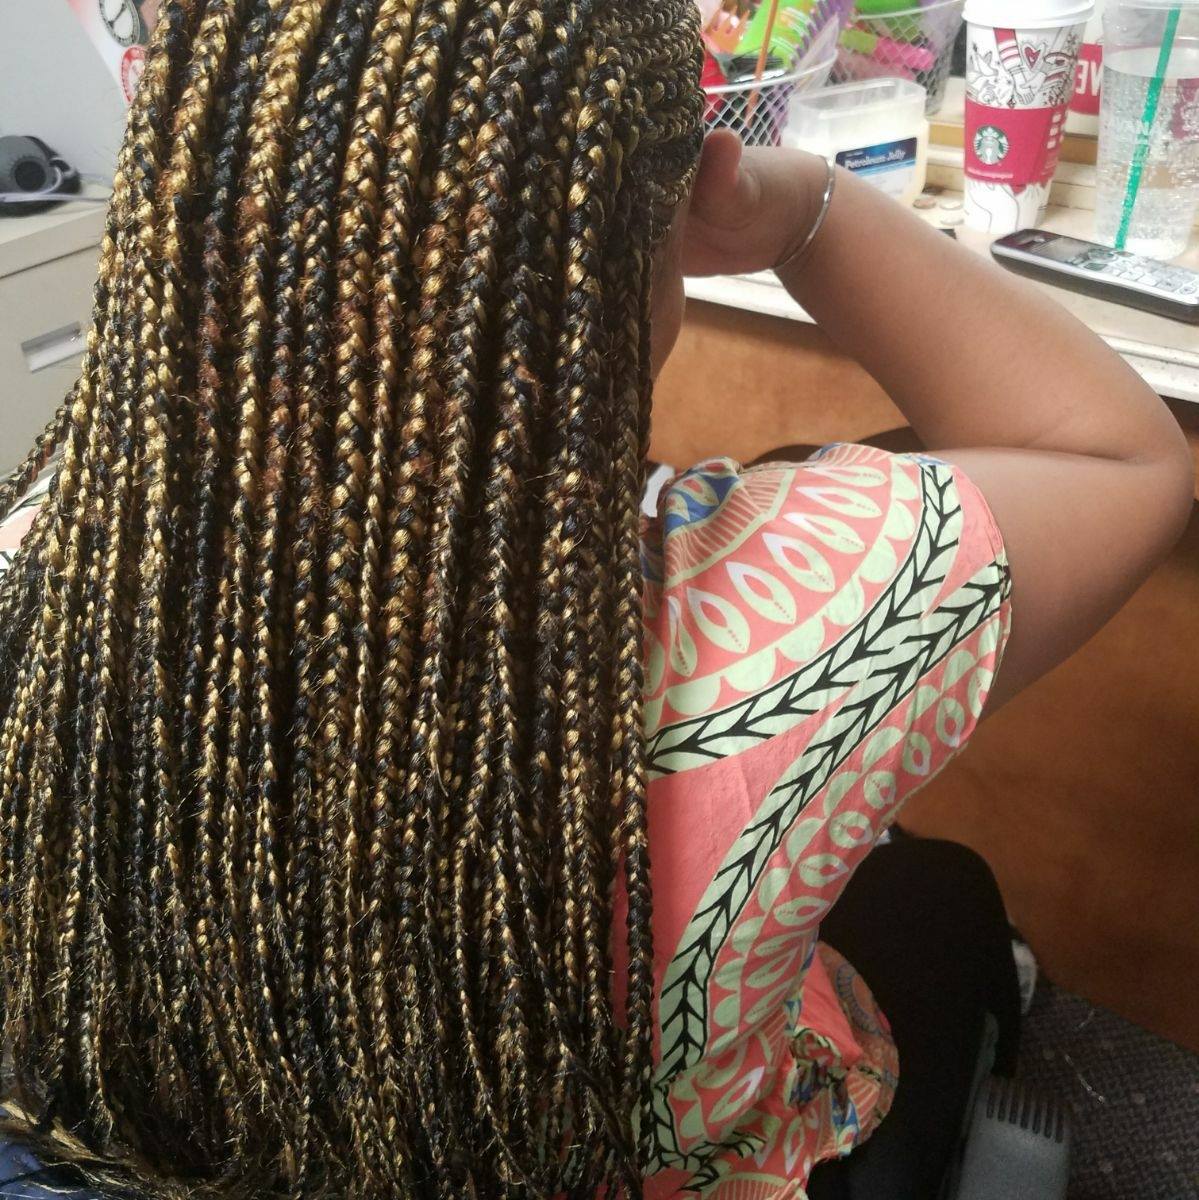 Hair briading done in Mariama's Beauty Supply Store